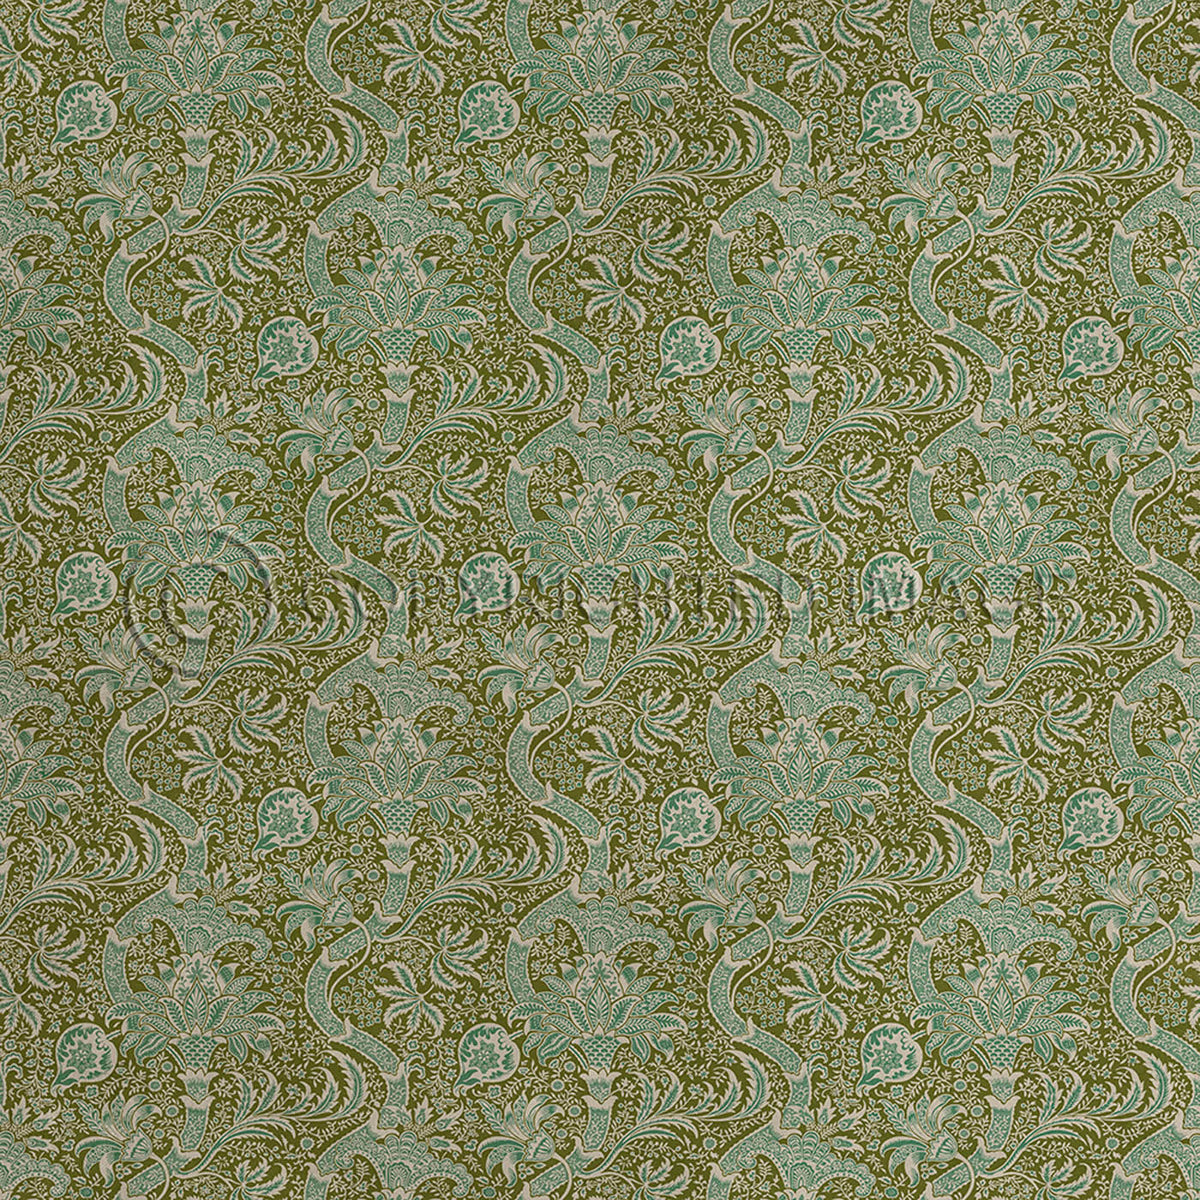 Indian Olive and Teal 120x120